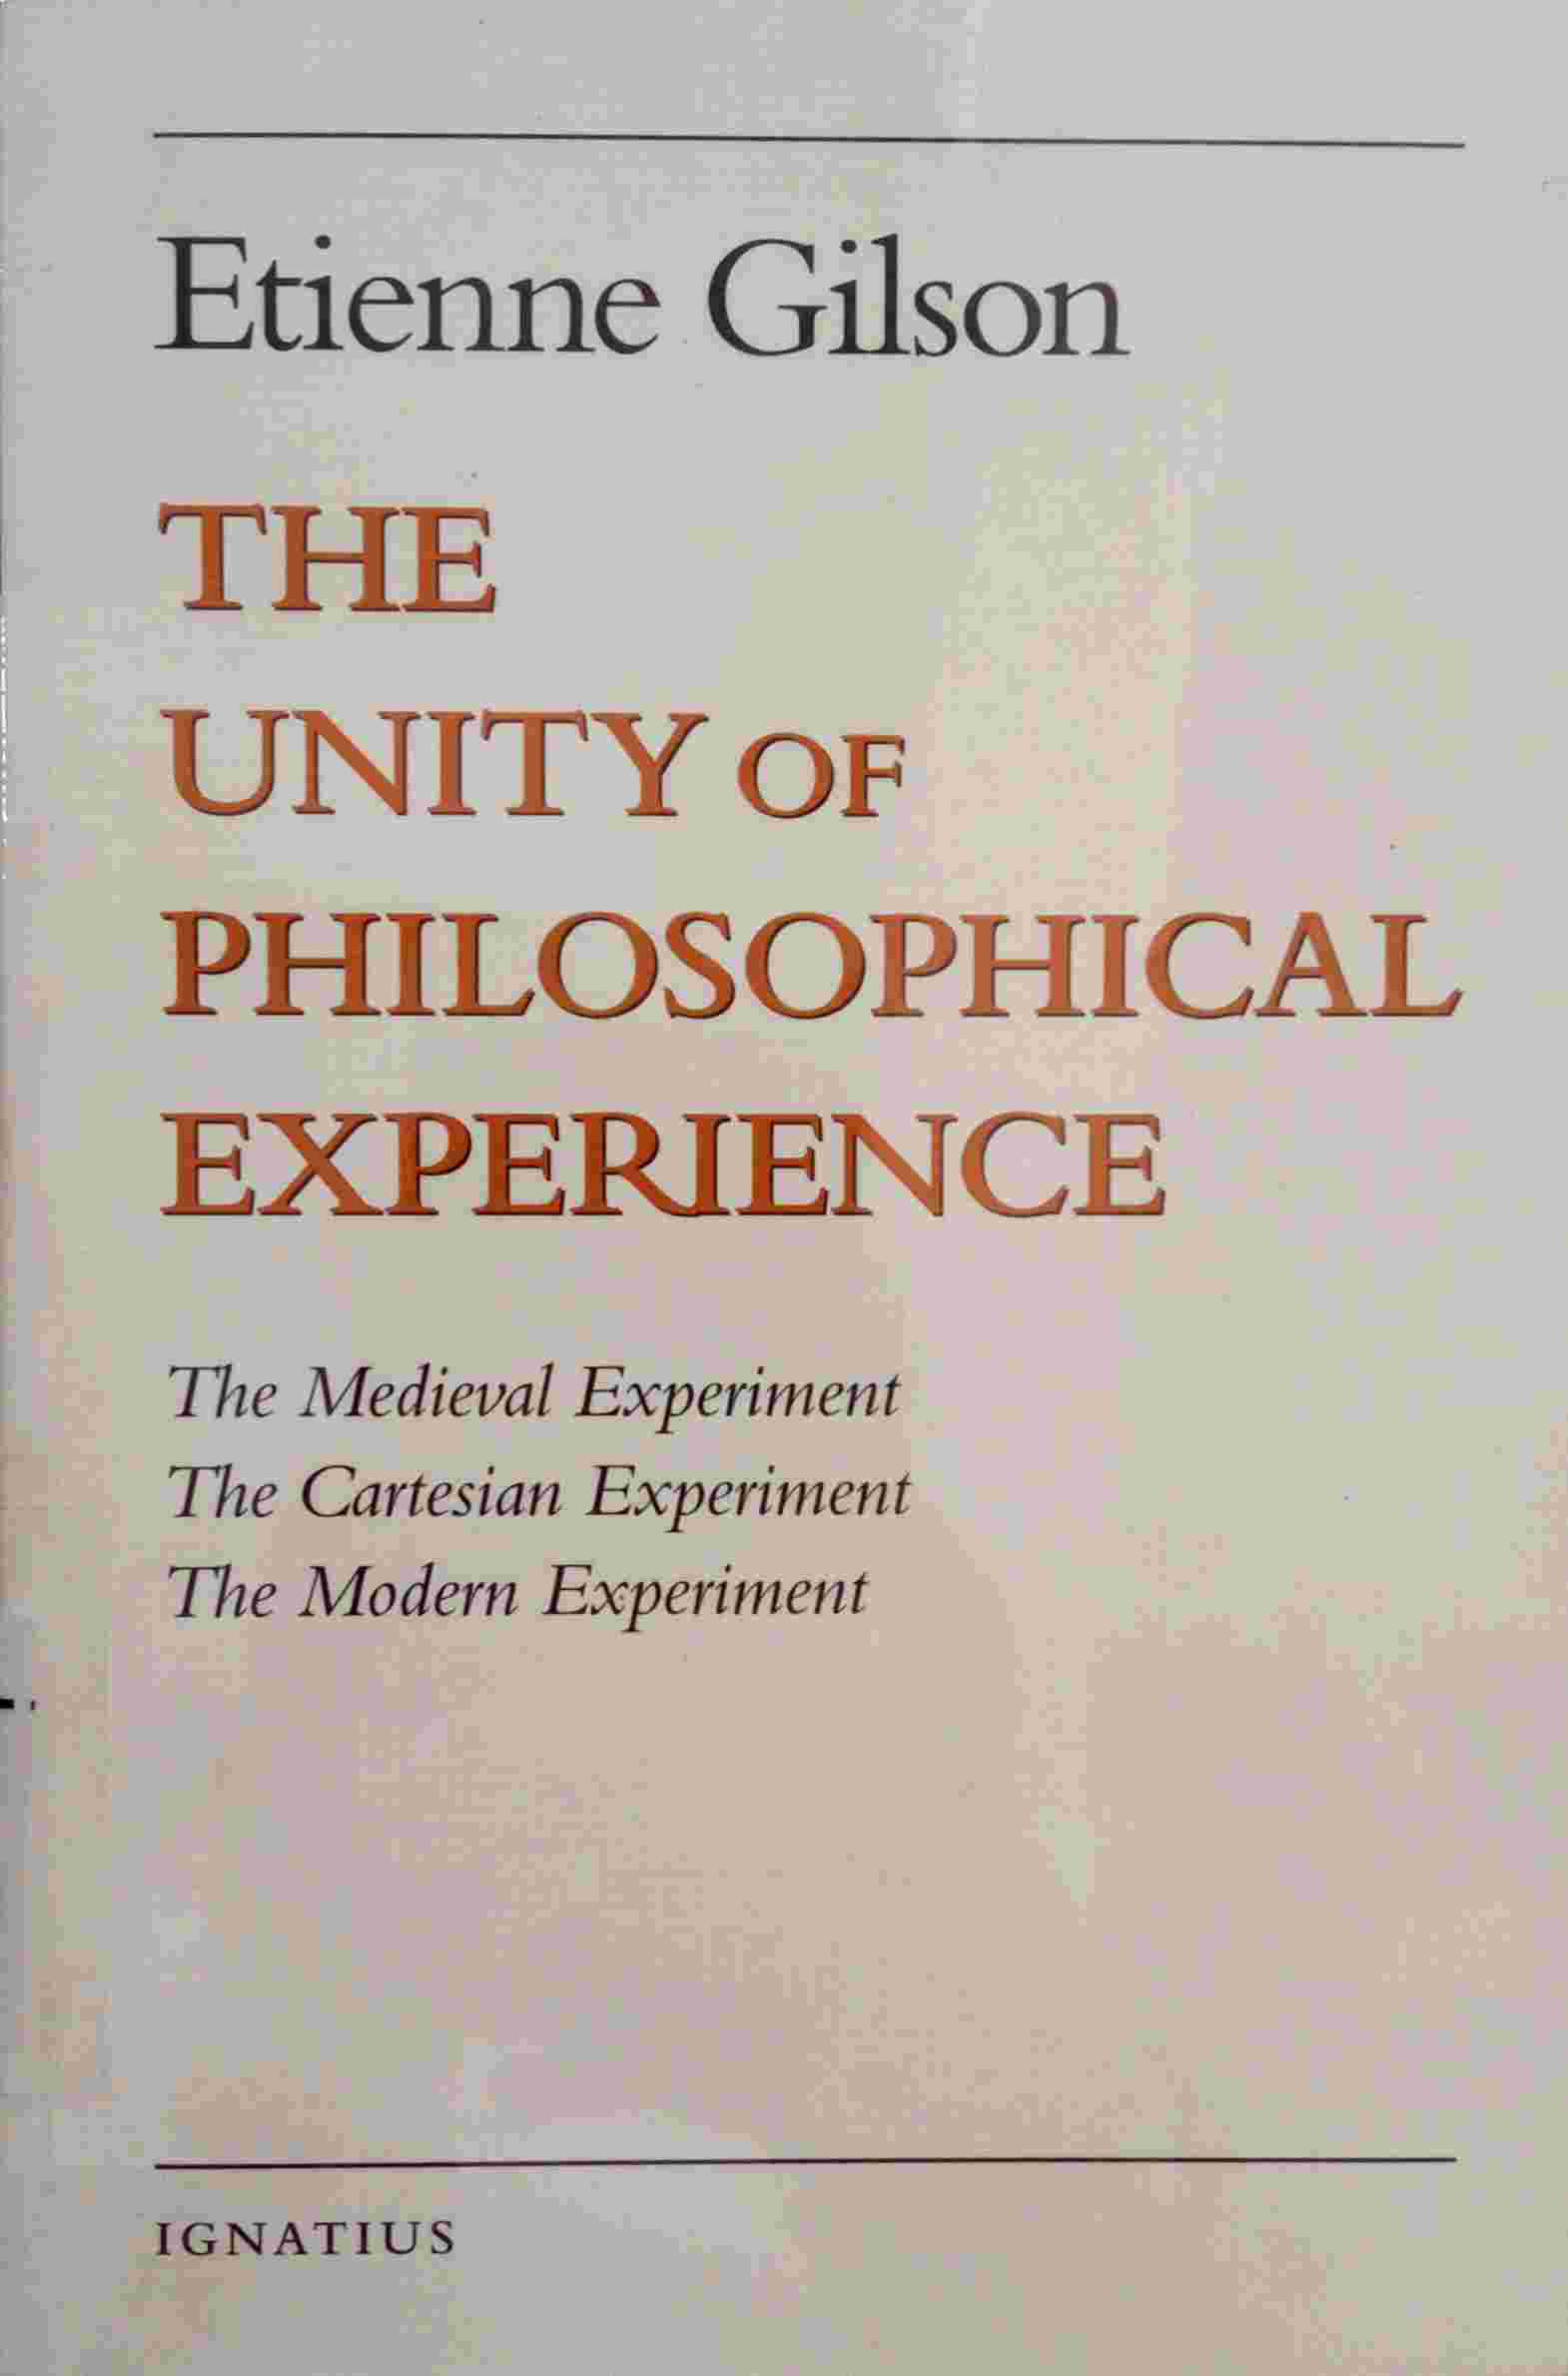 THE UNITY OF PHILOSOPHICAL EXPERIENCE